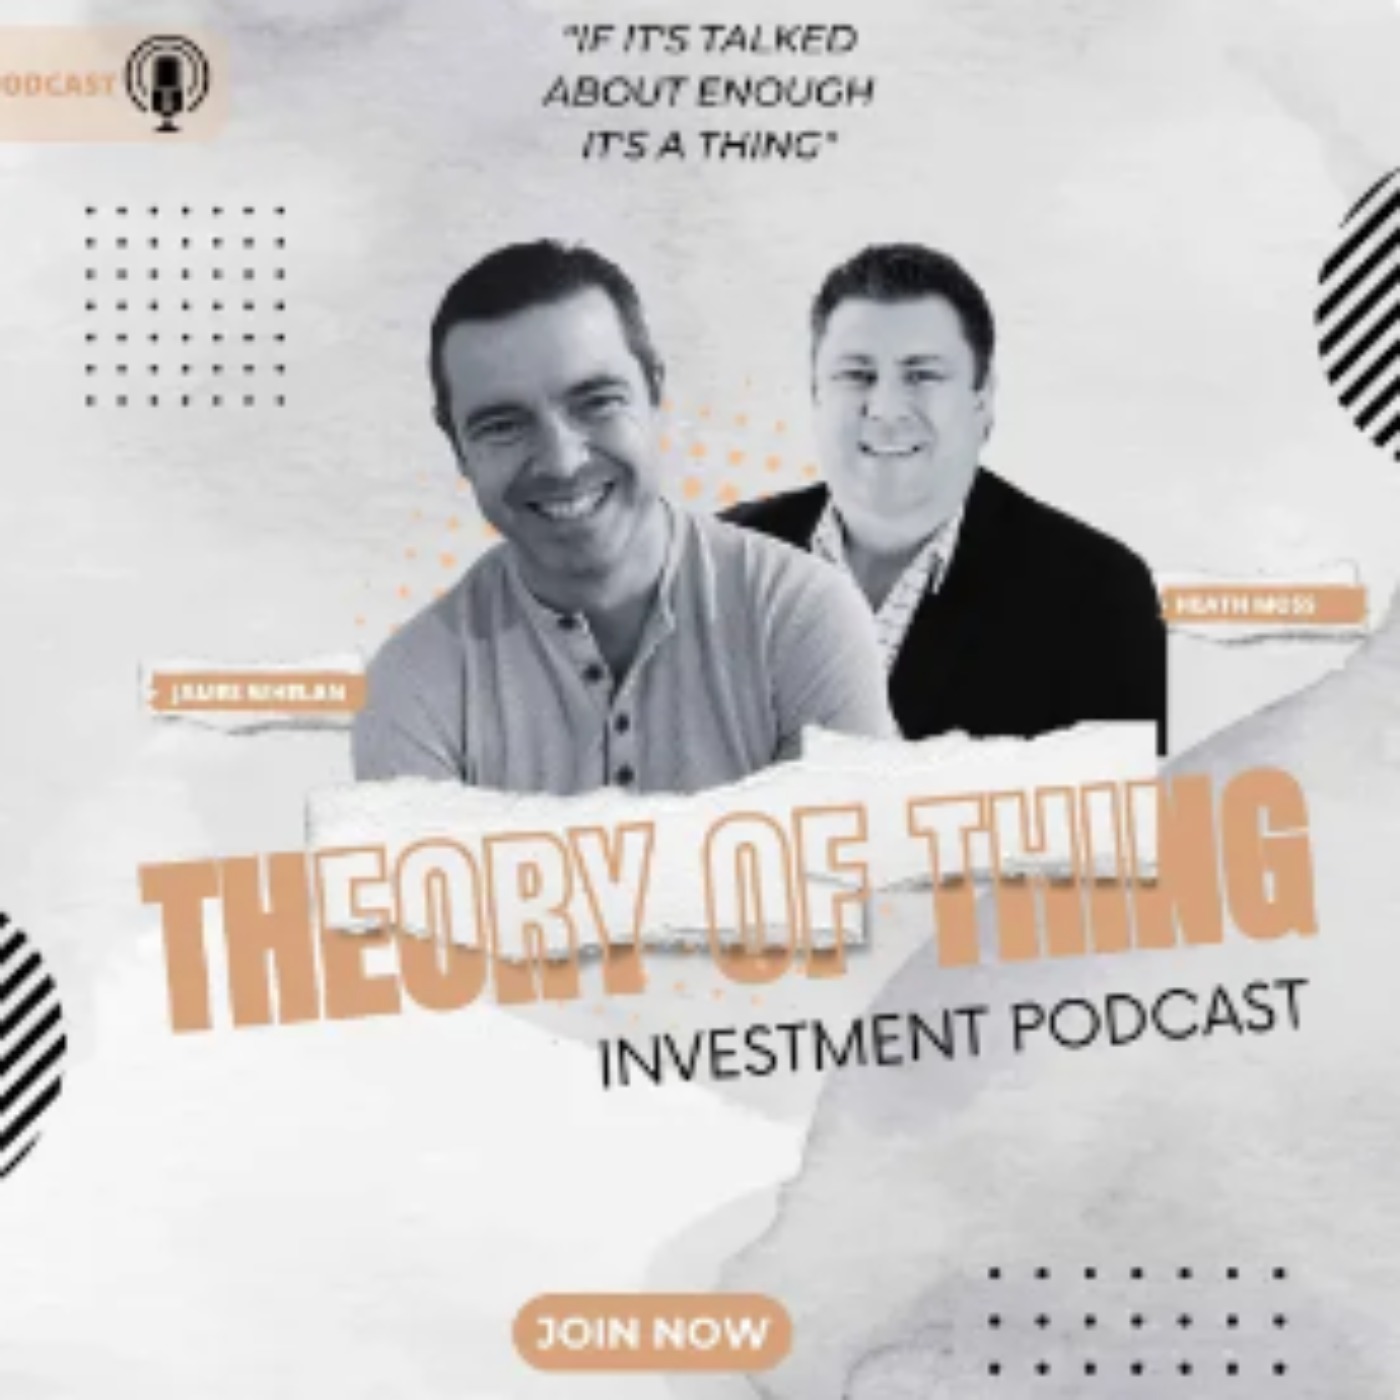 e35: The Theory of Thing Investment Podcast